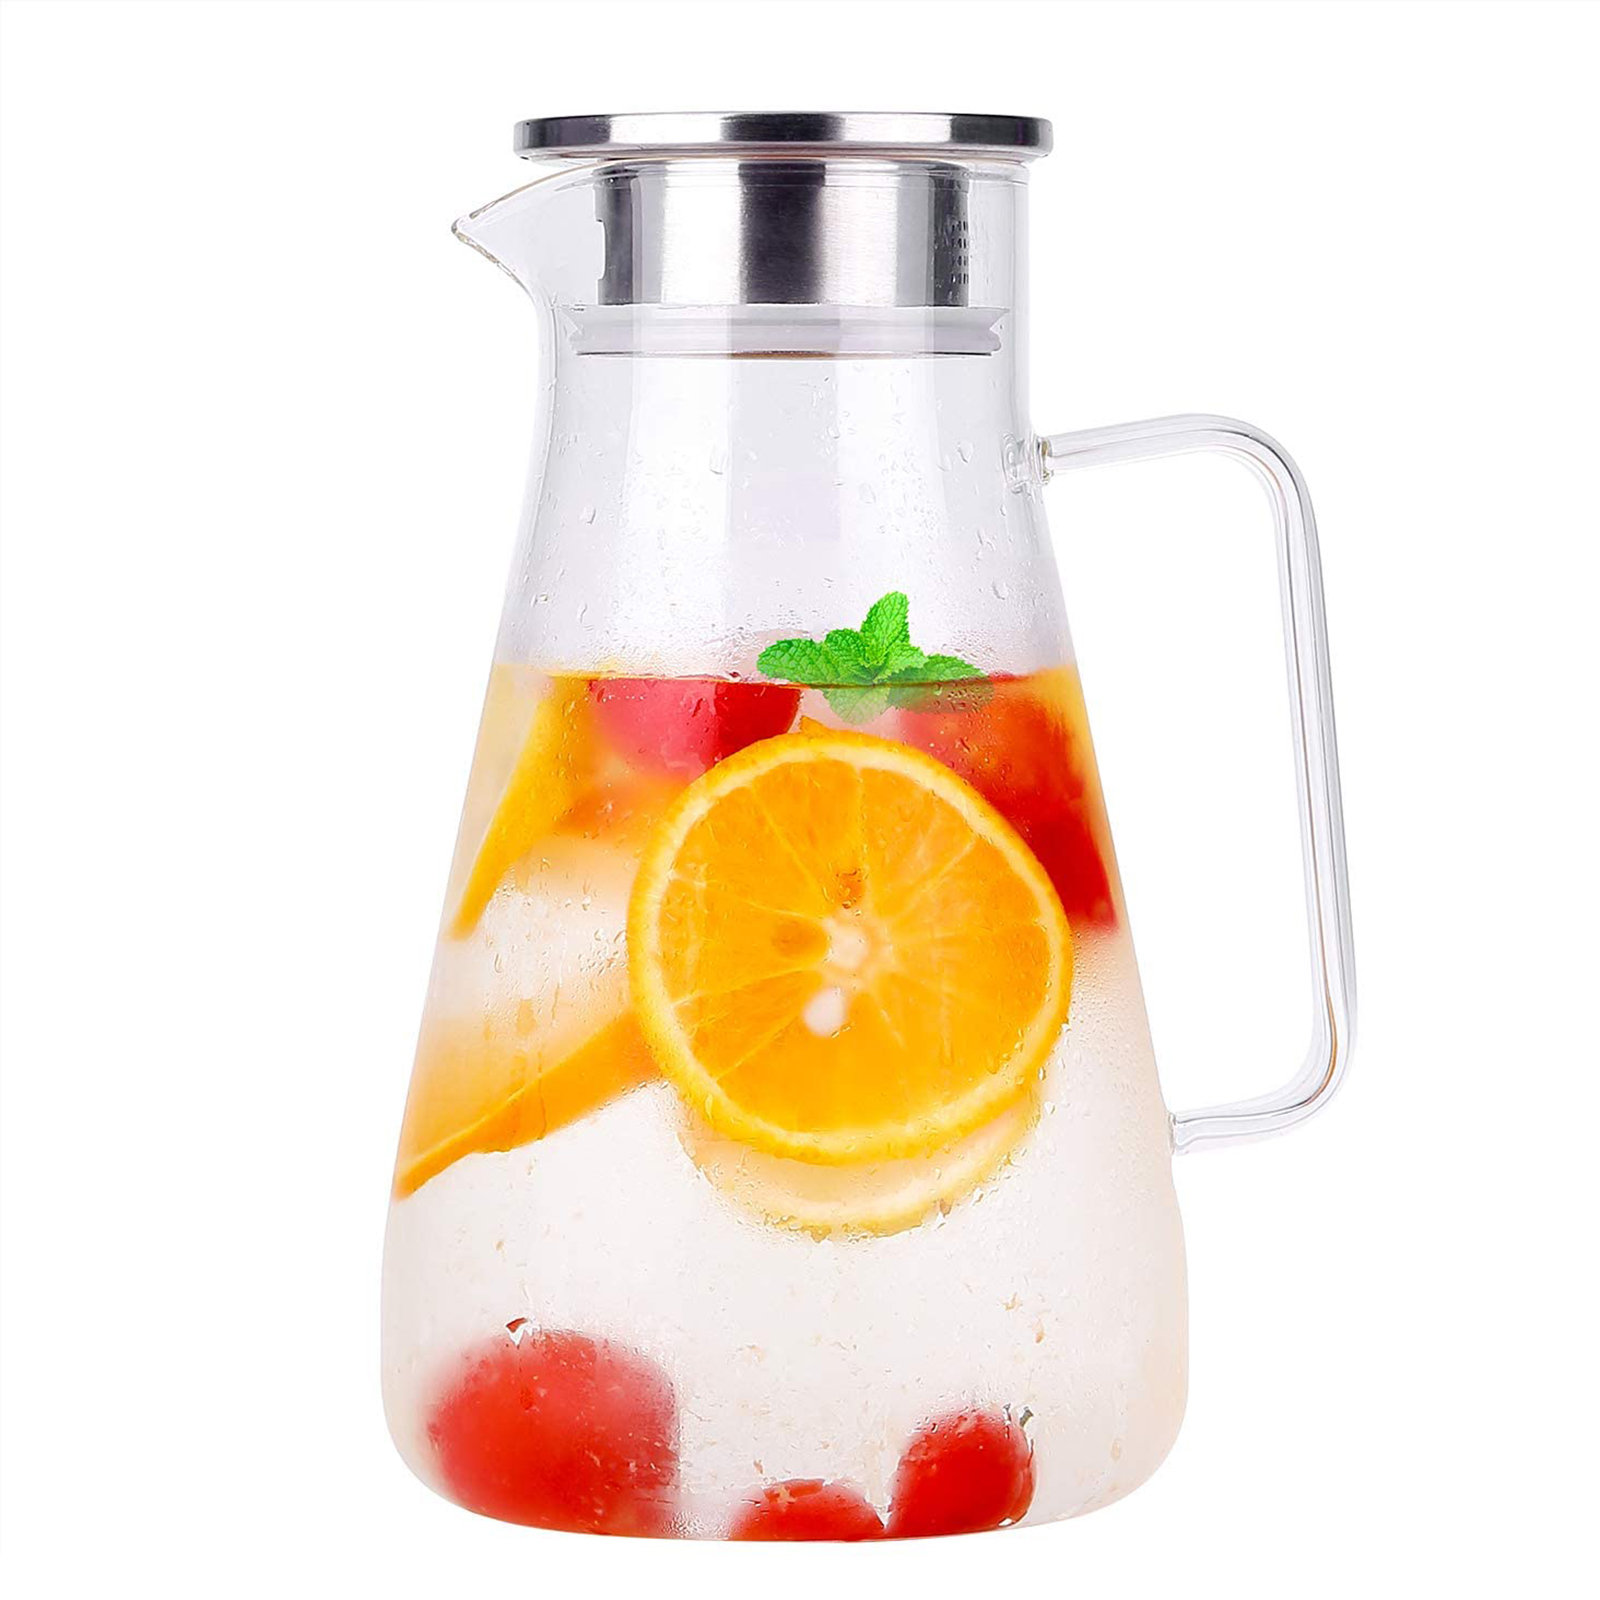 Ebern Designs 1.5 Liter 51 Oz Glass Pitcher With Lid, Glass Water Pitcher  For Fridge, Glass Carafe For Hot/cold Water, Iced Tea Pitcher, Large Pitcher  For Coffee, Juice And Homemade Beverage